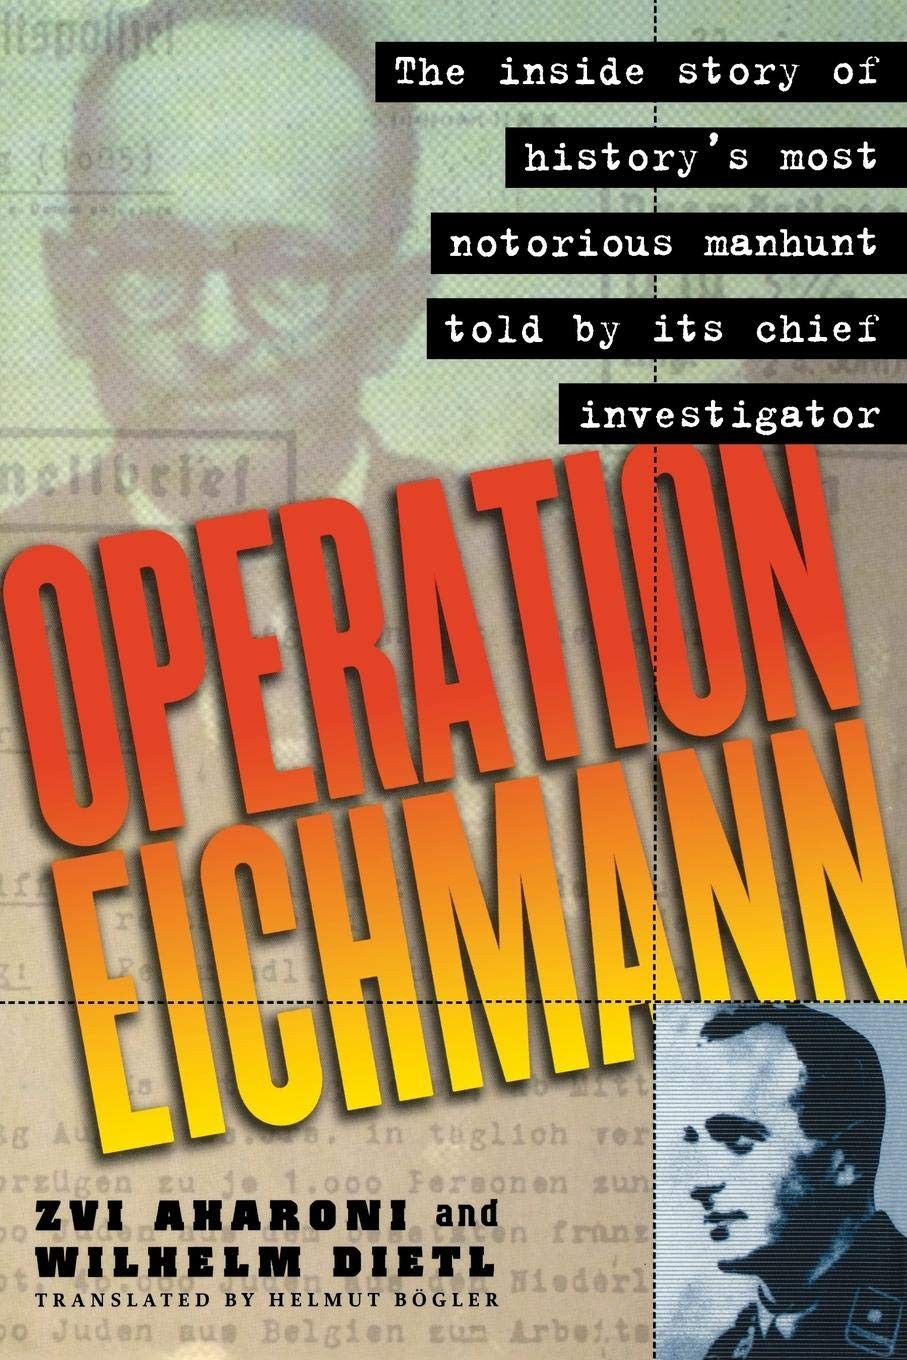 Operation Eichmann: The Truth About the Pursuit, Capture and Trial